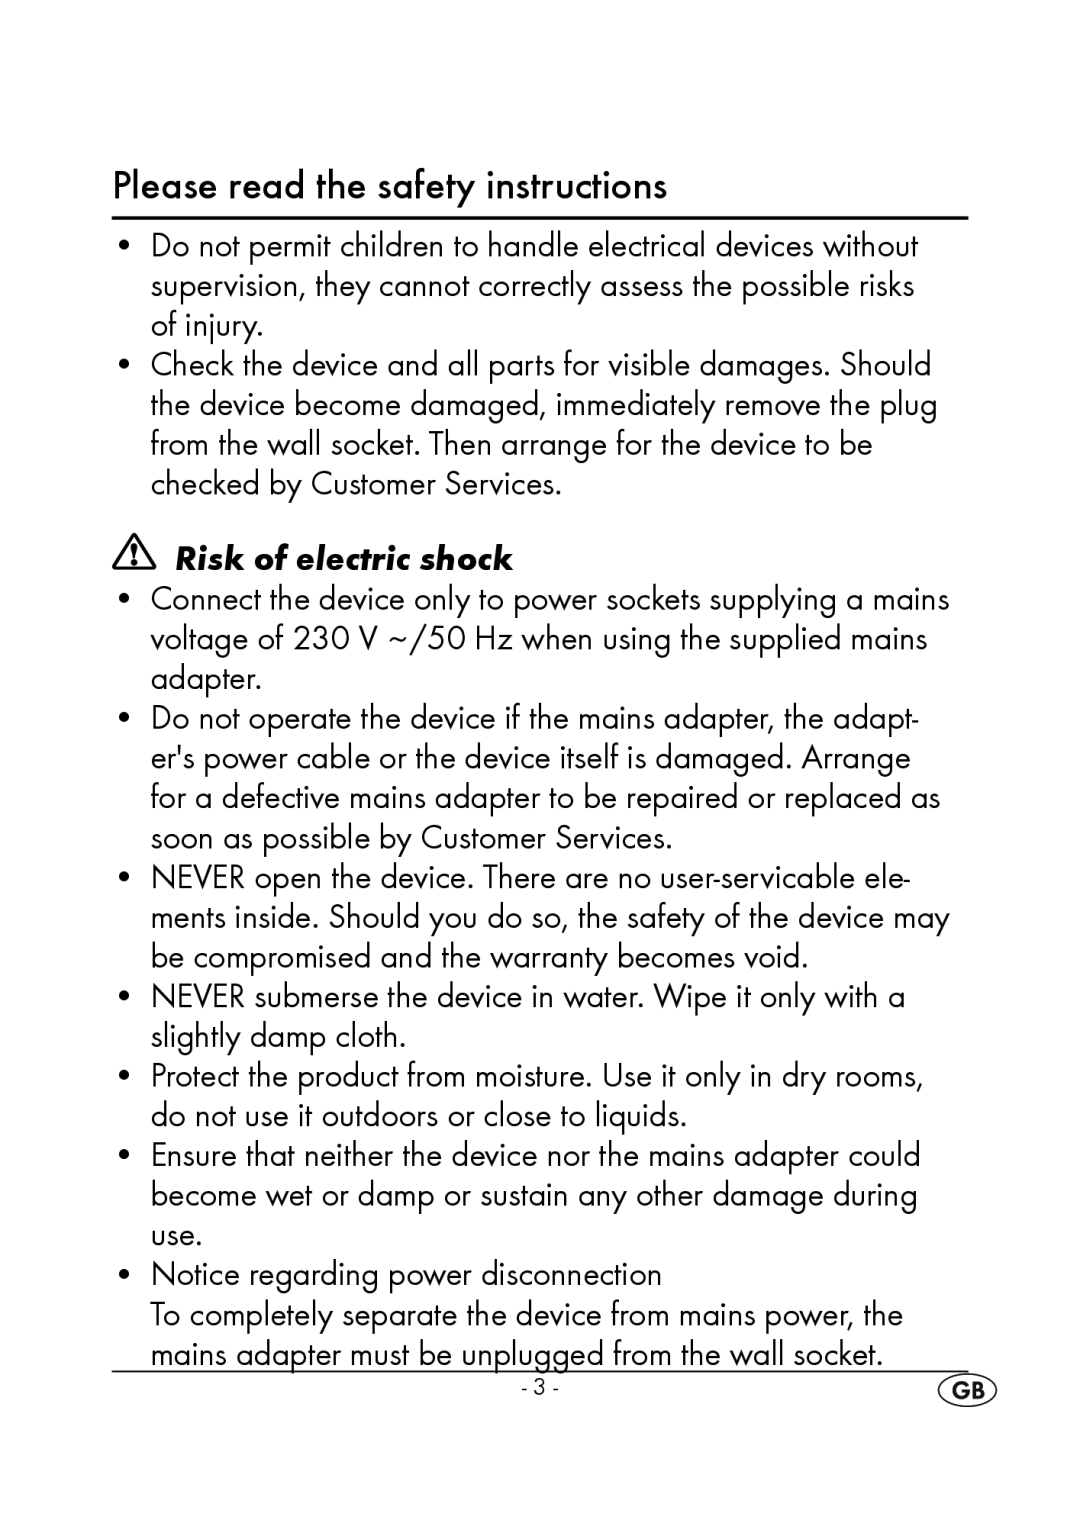 Silvercrest KH2351 instruction manual Please read the safety instructions, Risk of electric shock 